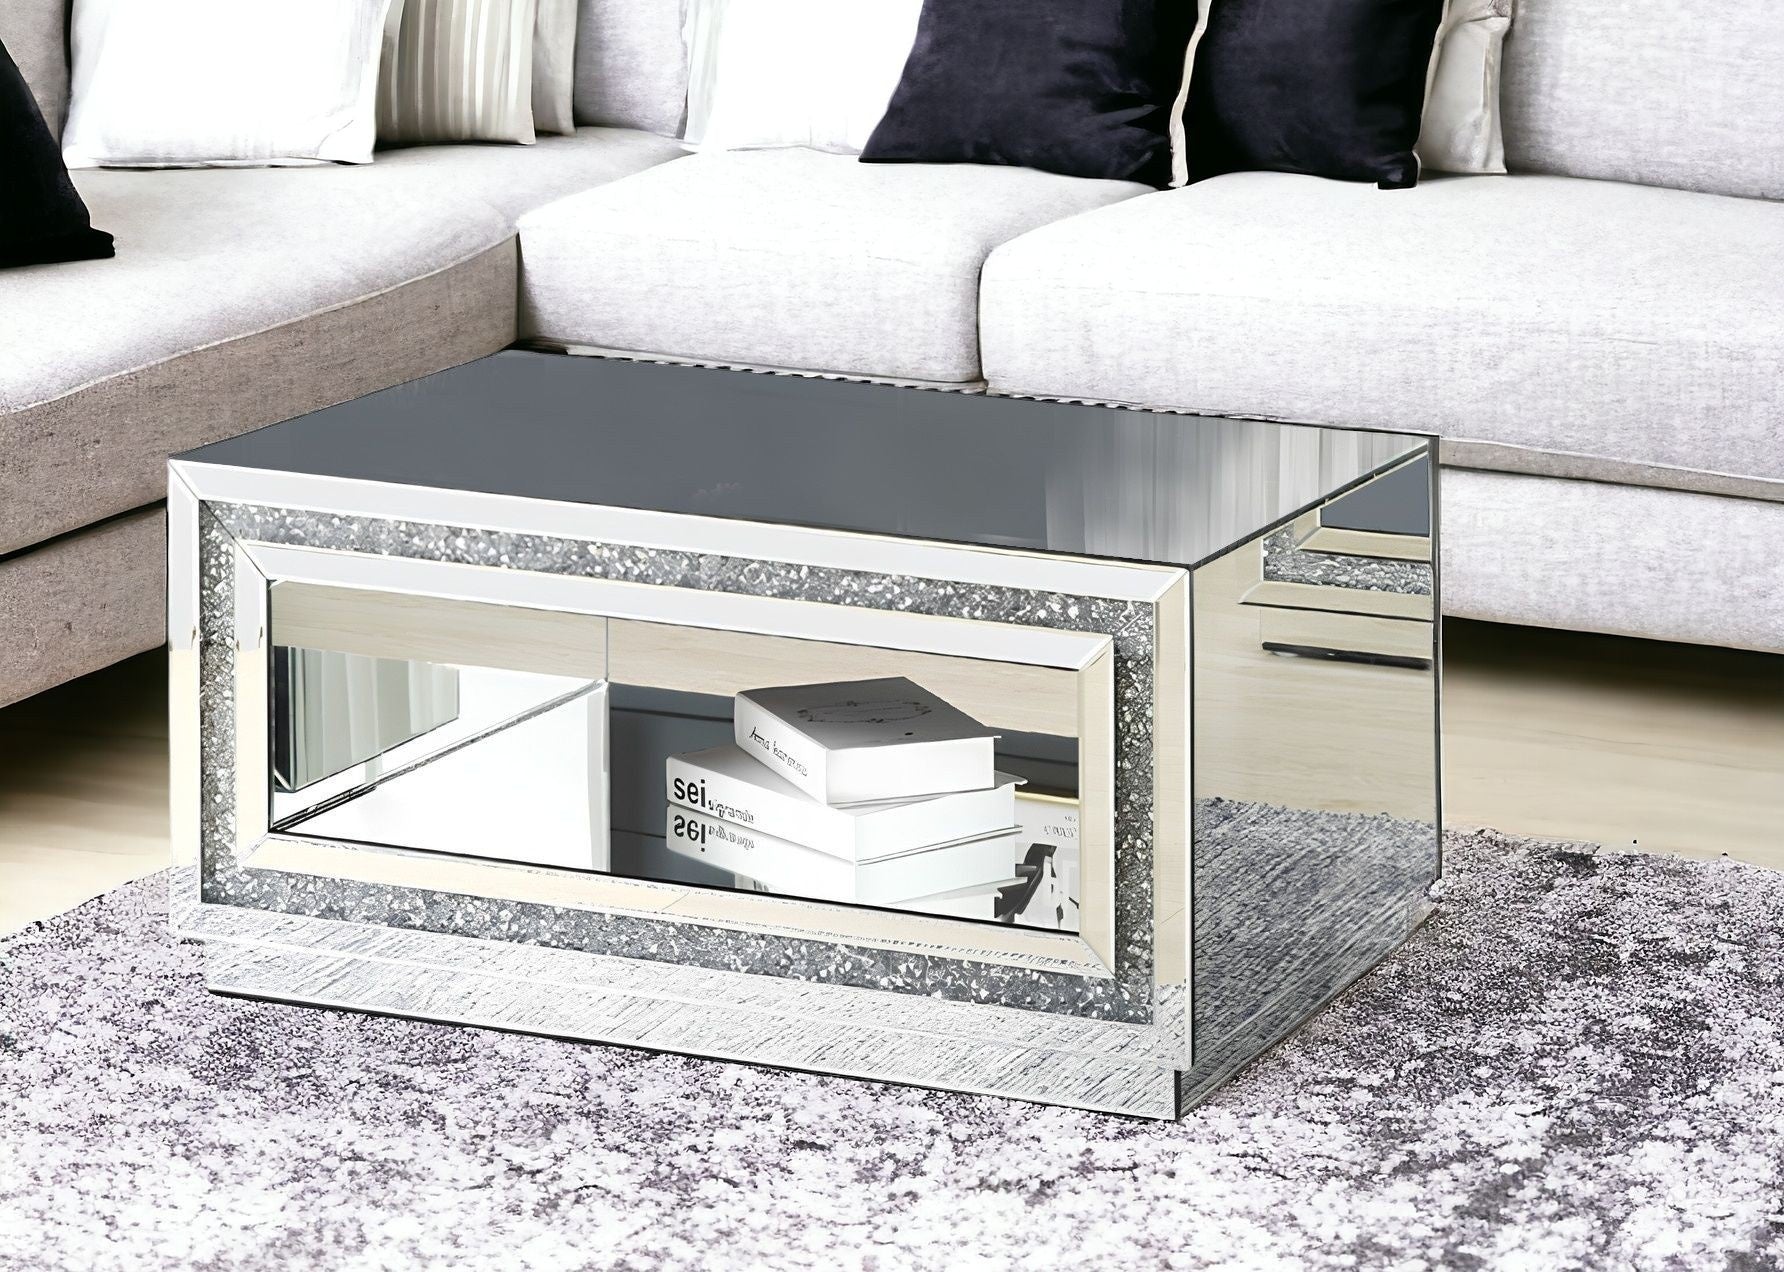 35" Silver Glass Mirrored Coffee Table With Shelf